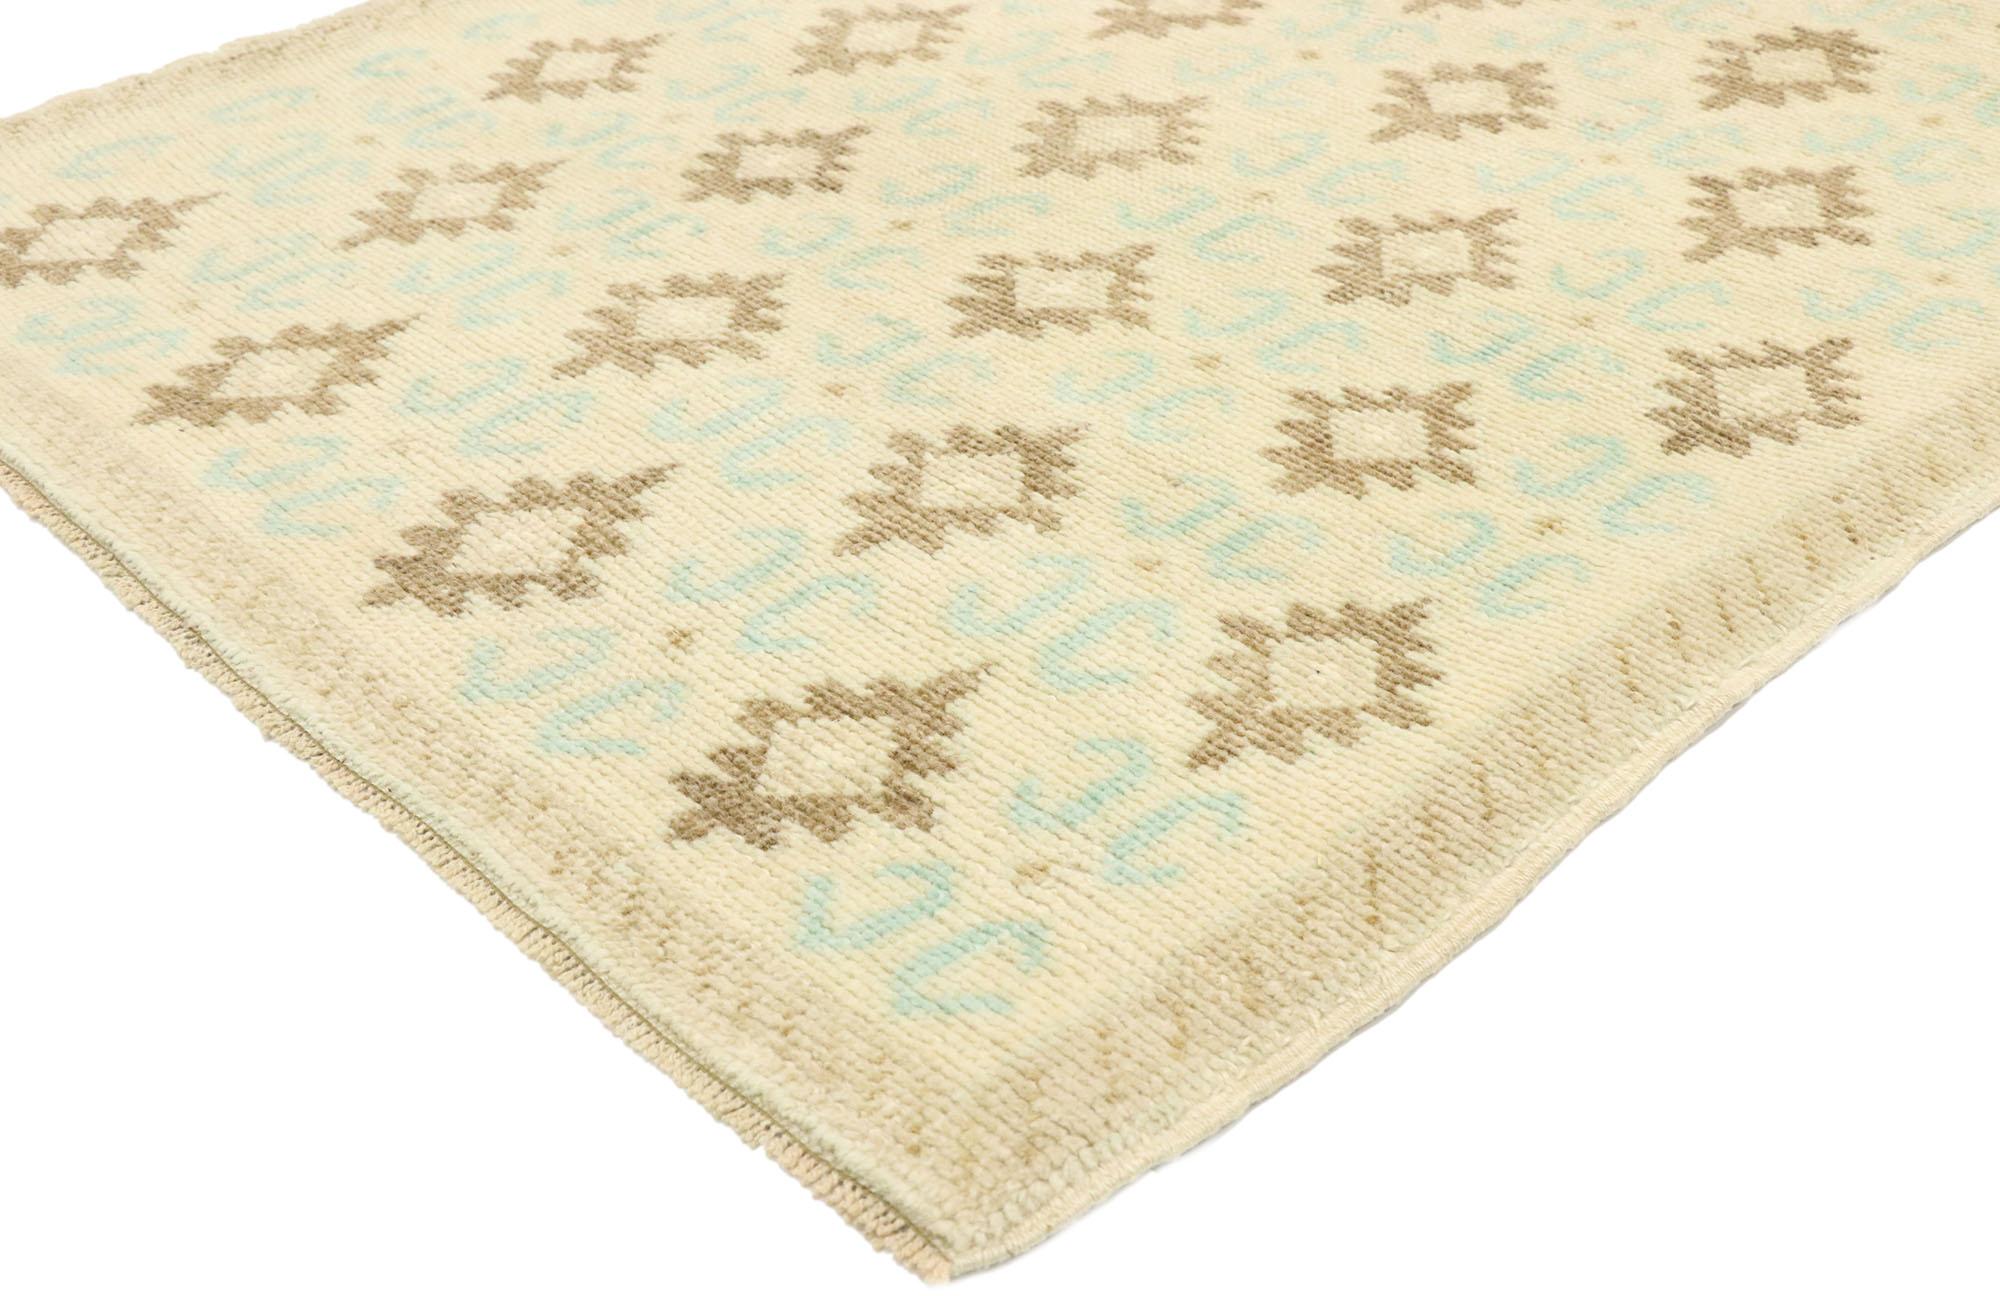 52986, vintage Turkish Oushak runner with Rustic French Provincial Chateau style. Striking the perfect balance of understated elegance and symmetry with soft, bespoke vibes, this hand knotted wool vintage Turkish Oushak runner beautifully embodies a